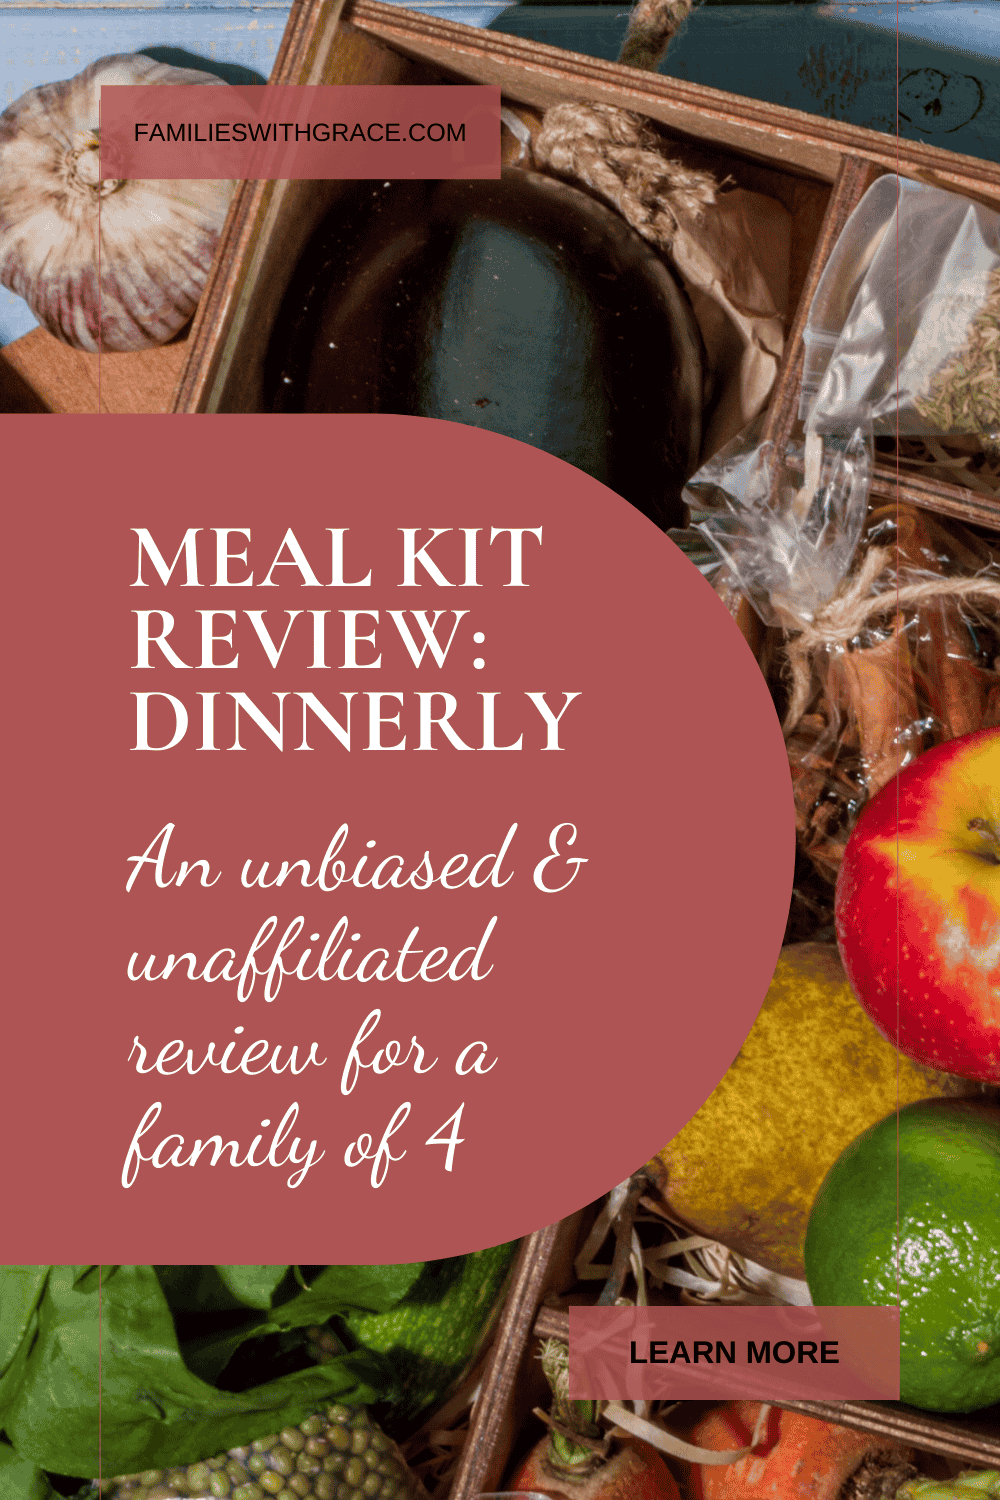 Meal kit review: Dinnerly